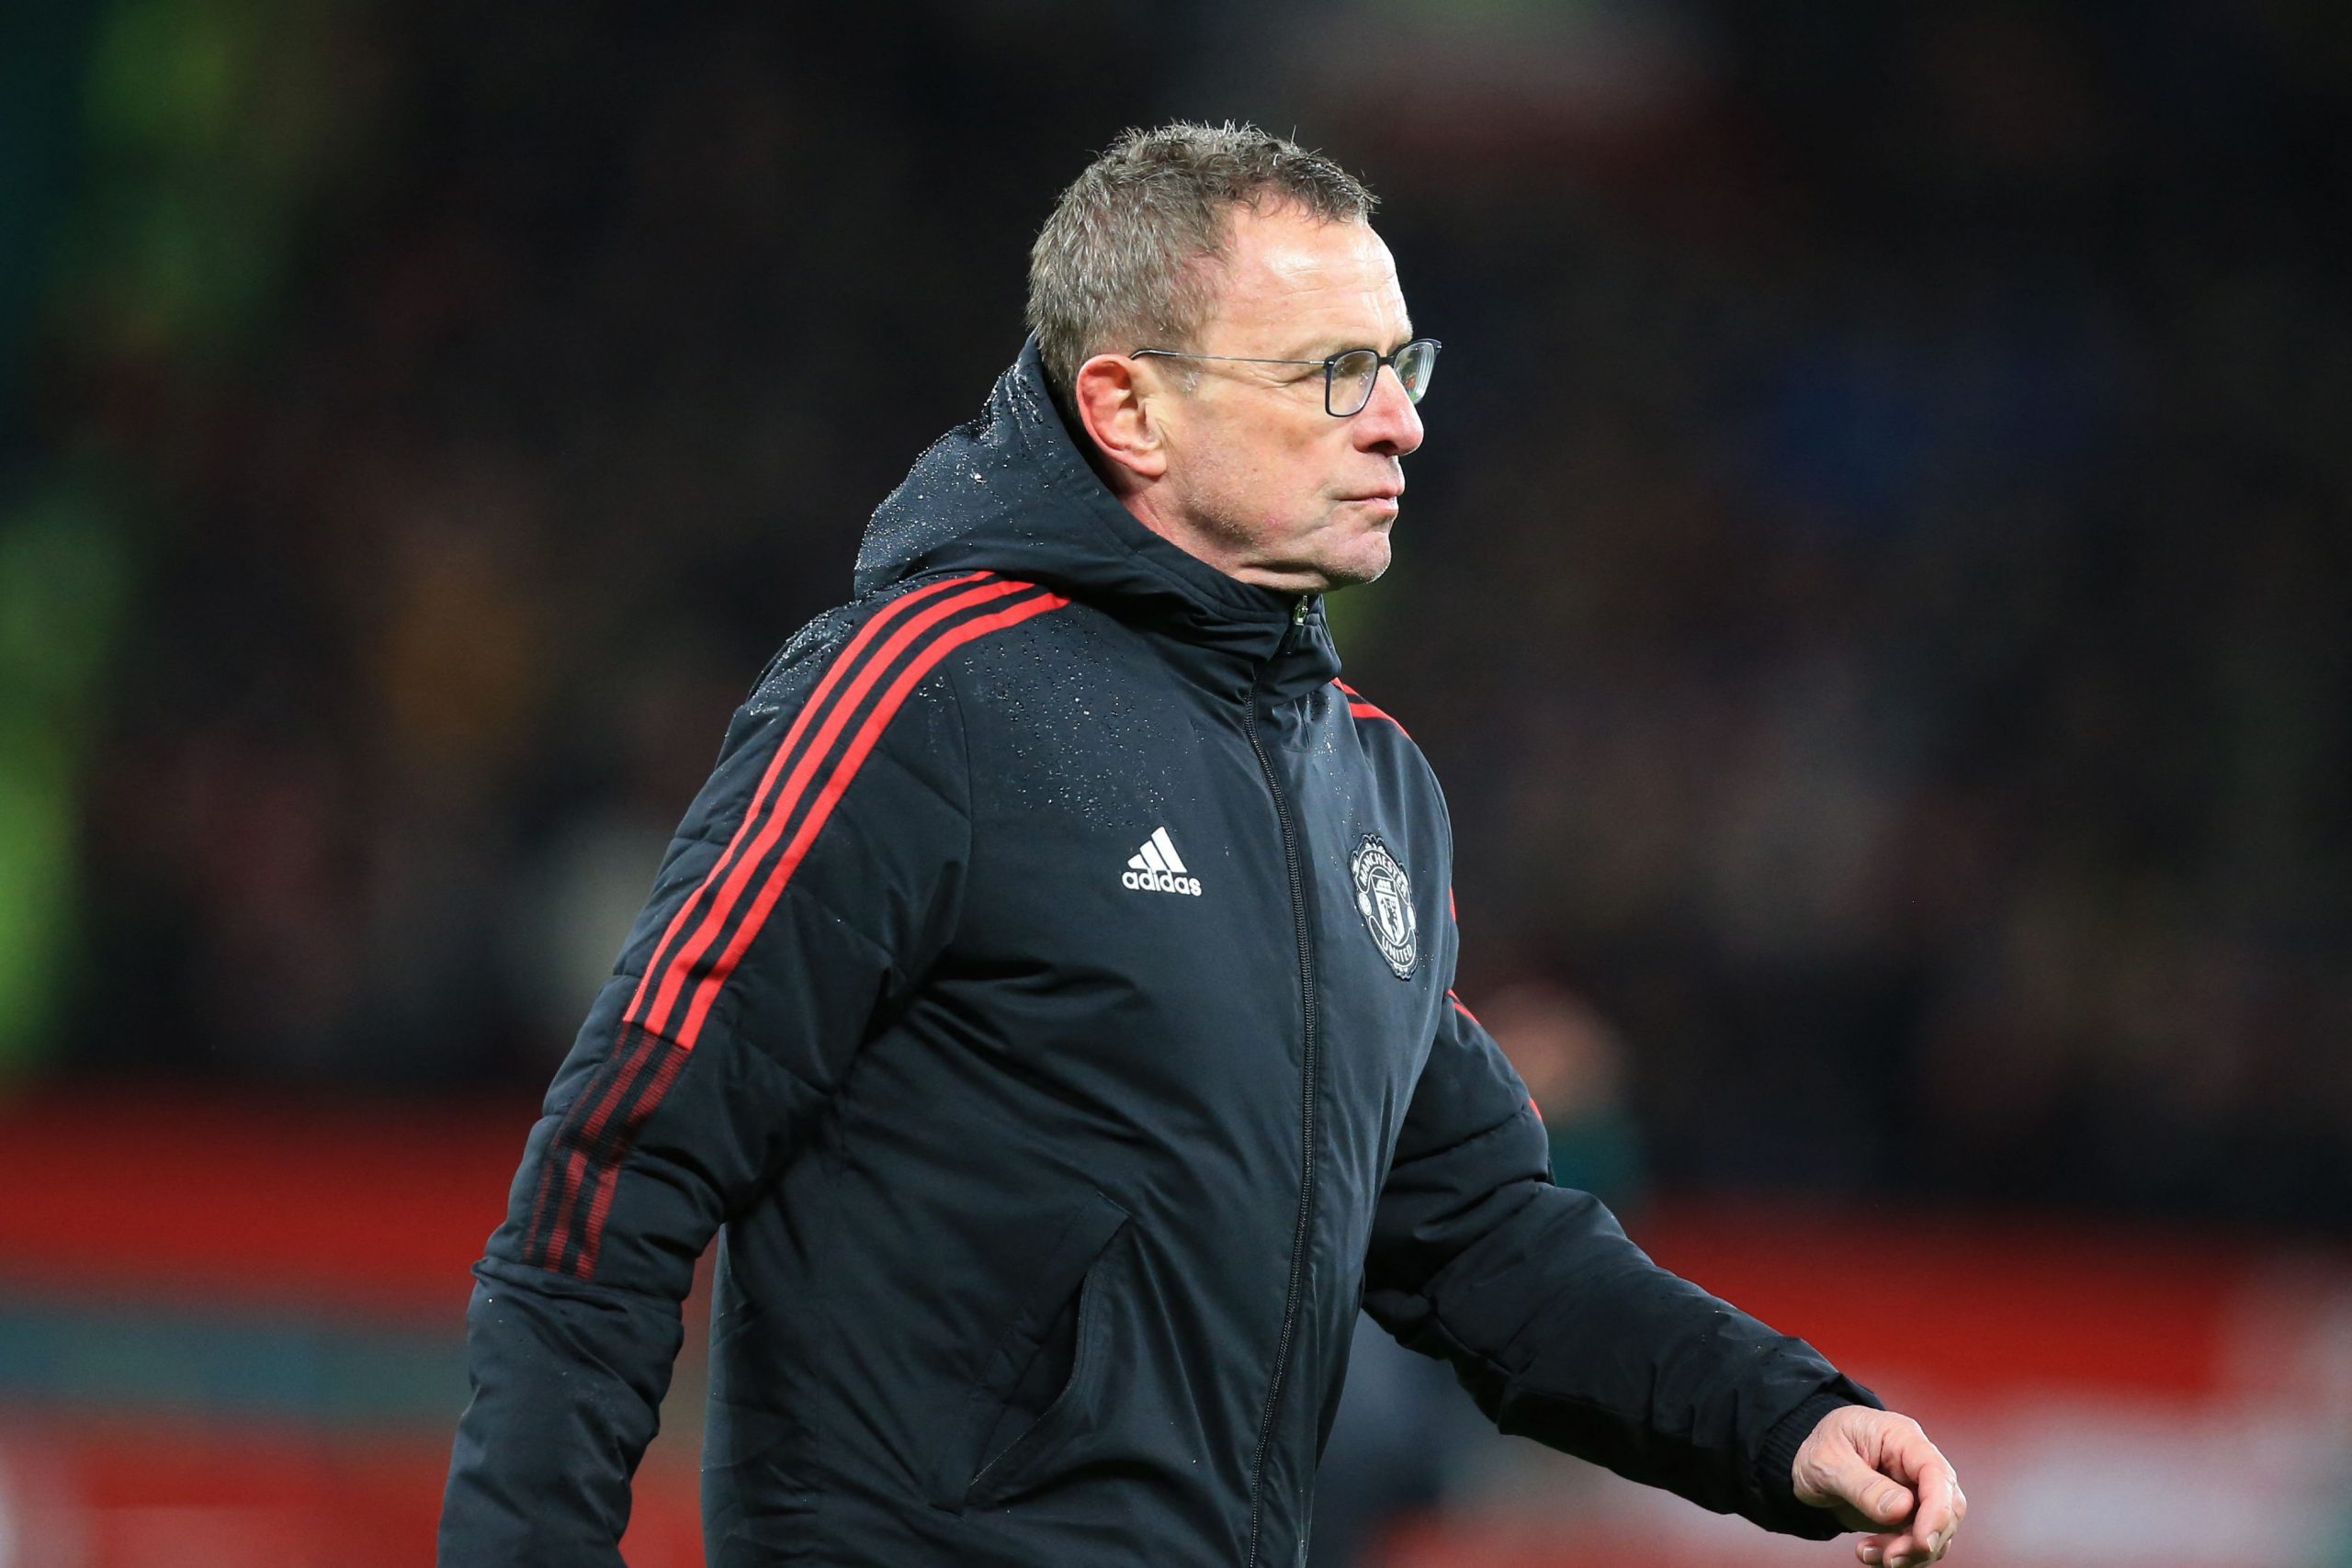 Ralf Rangnick gives his insight on Man United's recruitment strategy this summer.